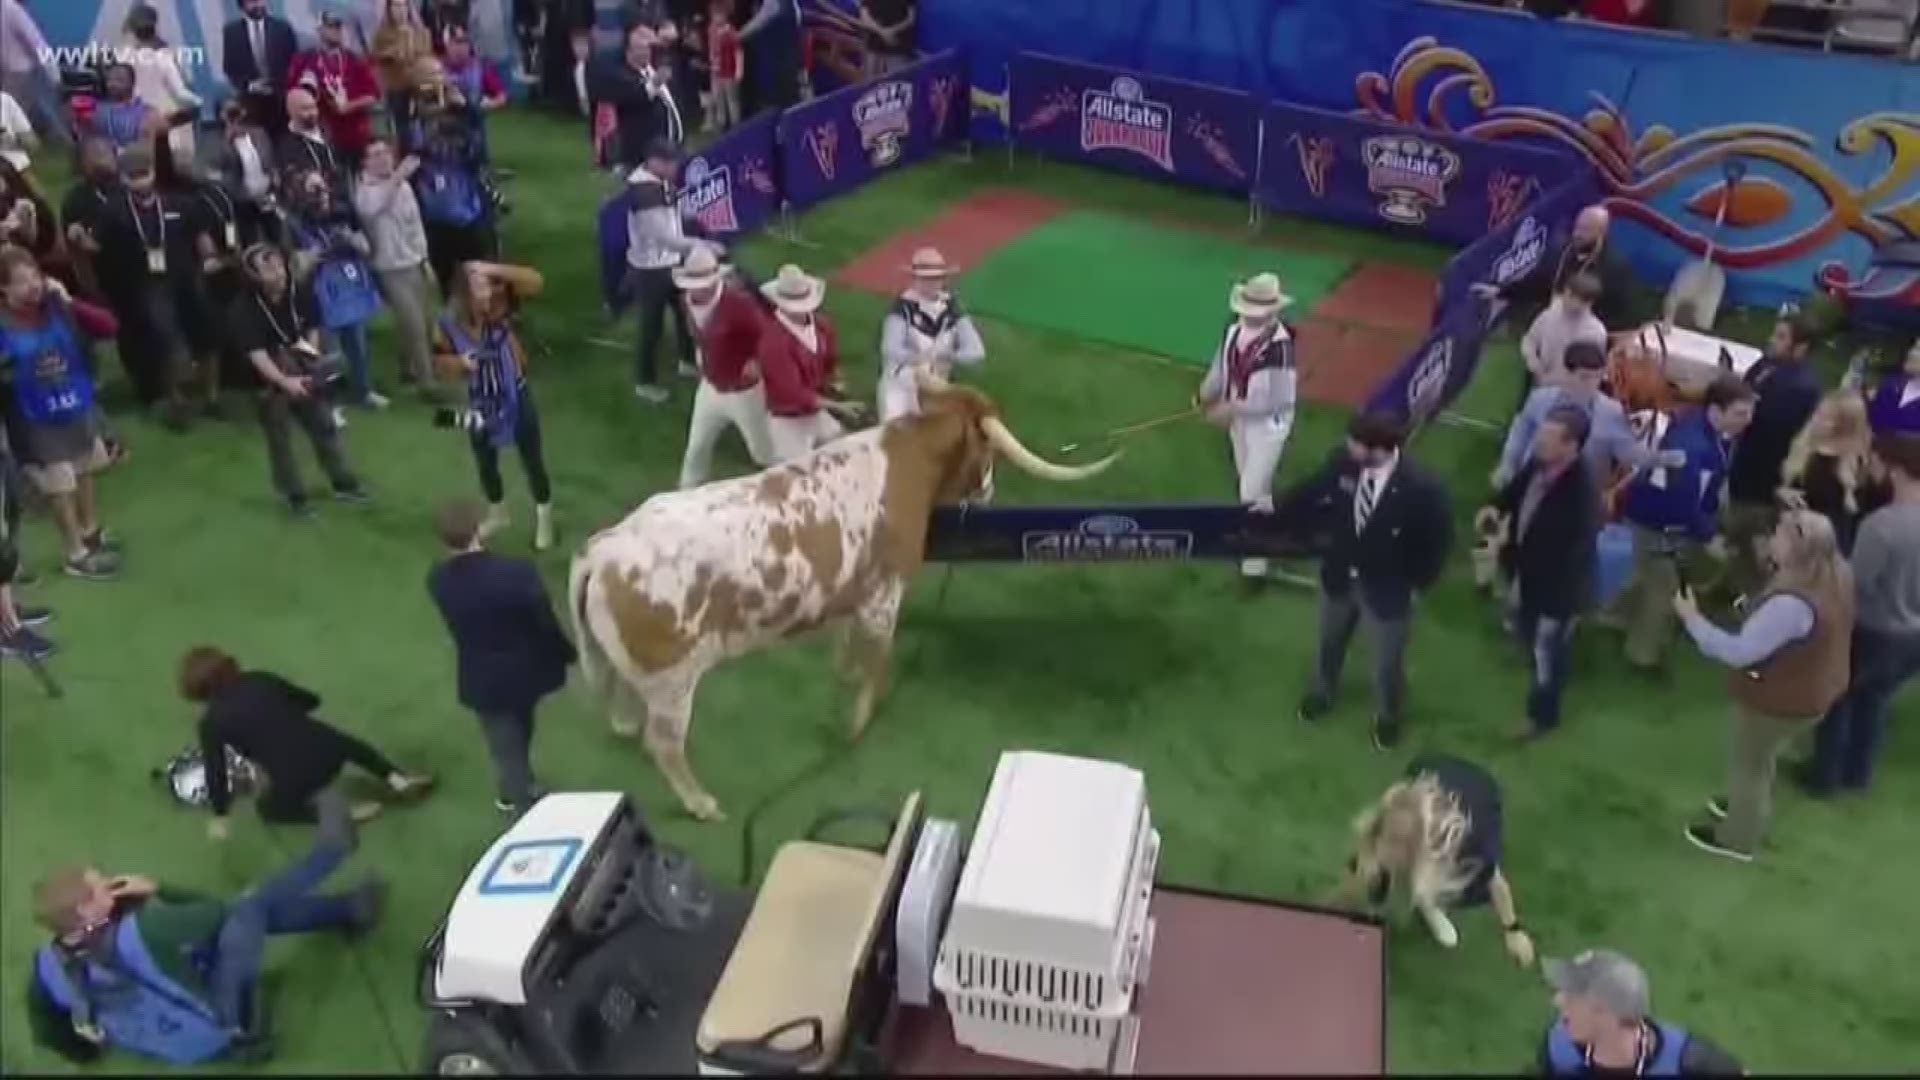 It's the play on the Sugar Bowl sidelines that's getting as much attention as those on the gridiron. The UT mascot, Bevo, a 1,600 pound longhorn steer, could have had a penalty flag thrown for unnecessary roughness and a personal foul, as he pushed out of bounds towards UGA, Georgia's bulldog. Now PETA wants change.